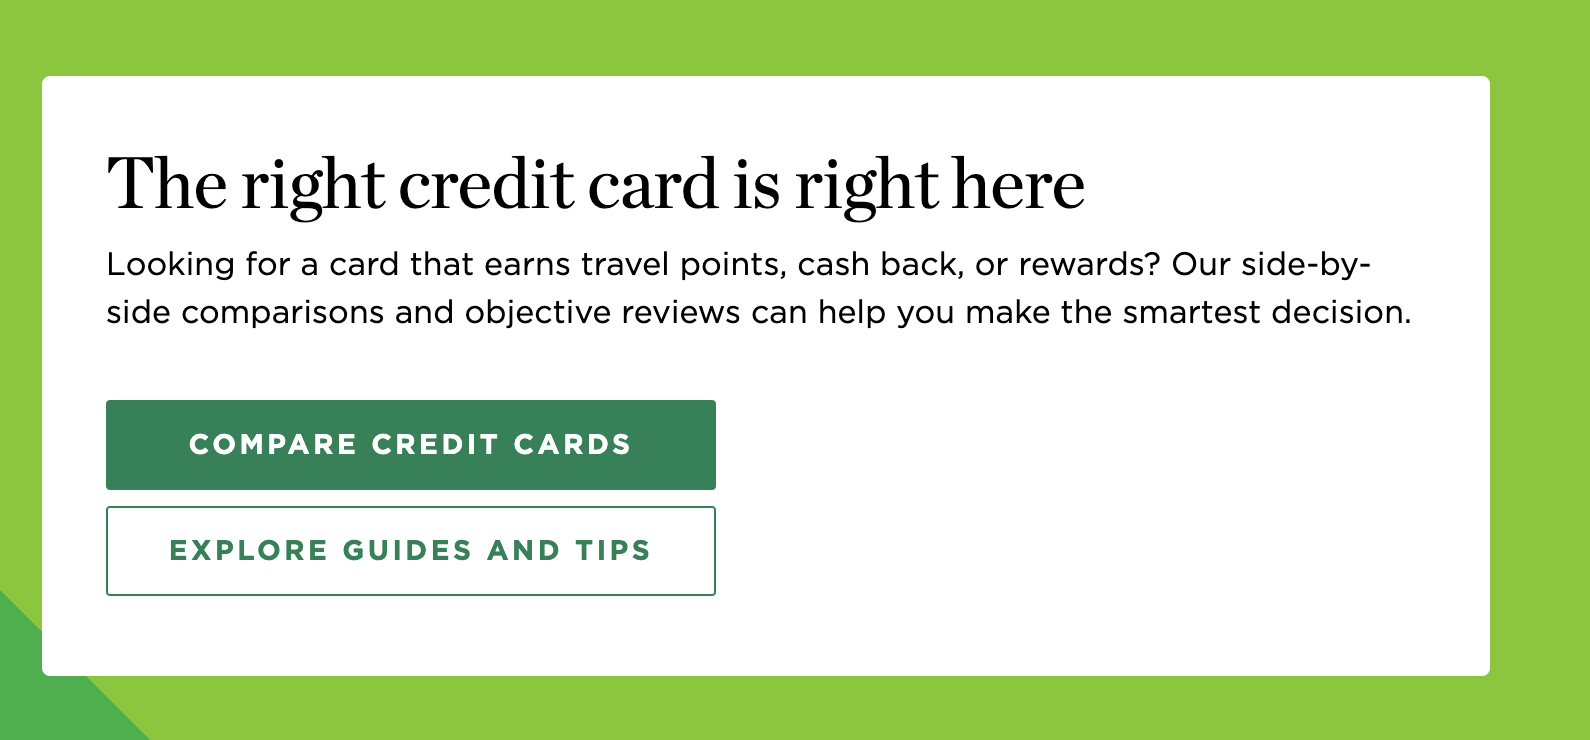 The right credit card is right here. Looking for a card that earns travel points, cash back, or rewards? Our side-by-side comparisons and objective reviews can help you make the smartest decision. Button one: Compare credit cards. Button two: Explore guides and tips.